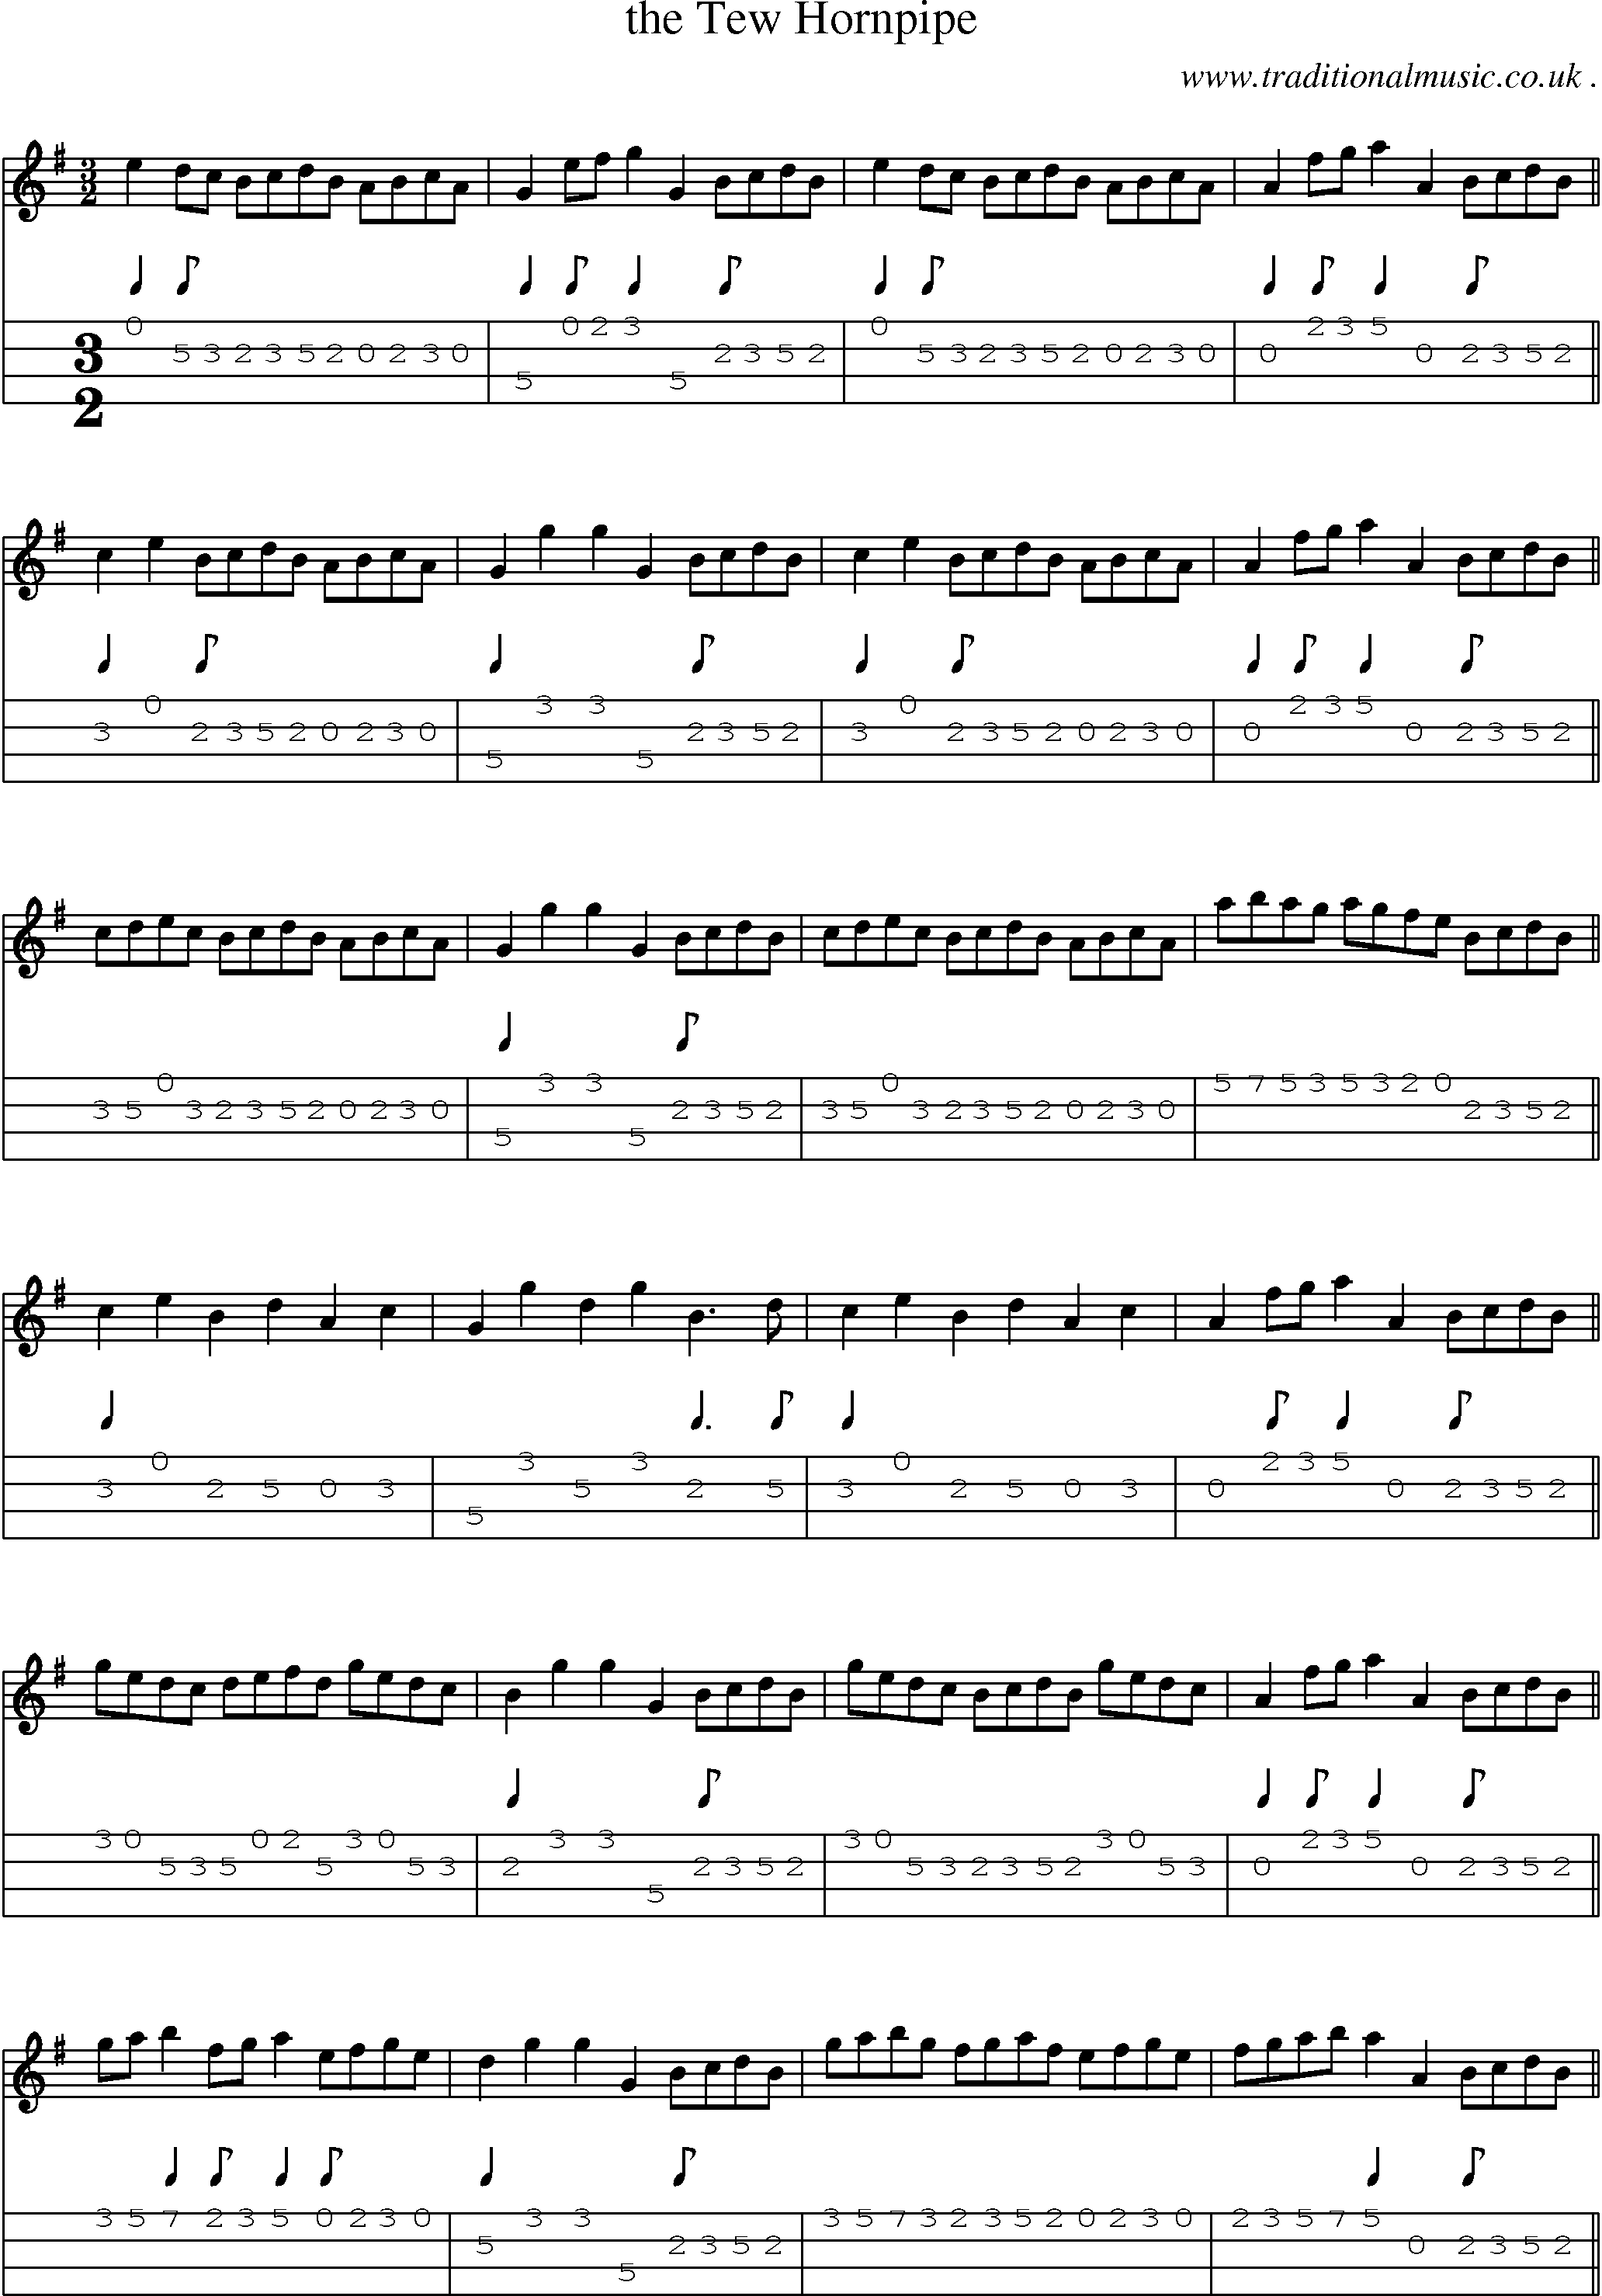 Sheet-Music and Mandolin Tabs for The Tew Hornpipe